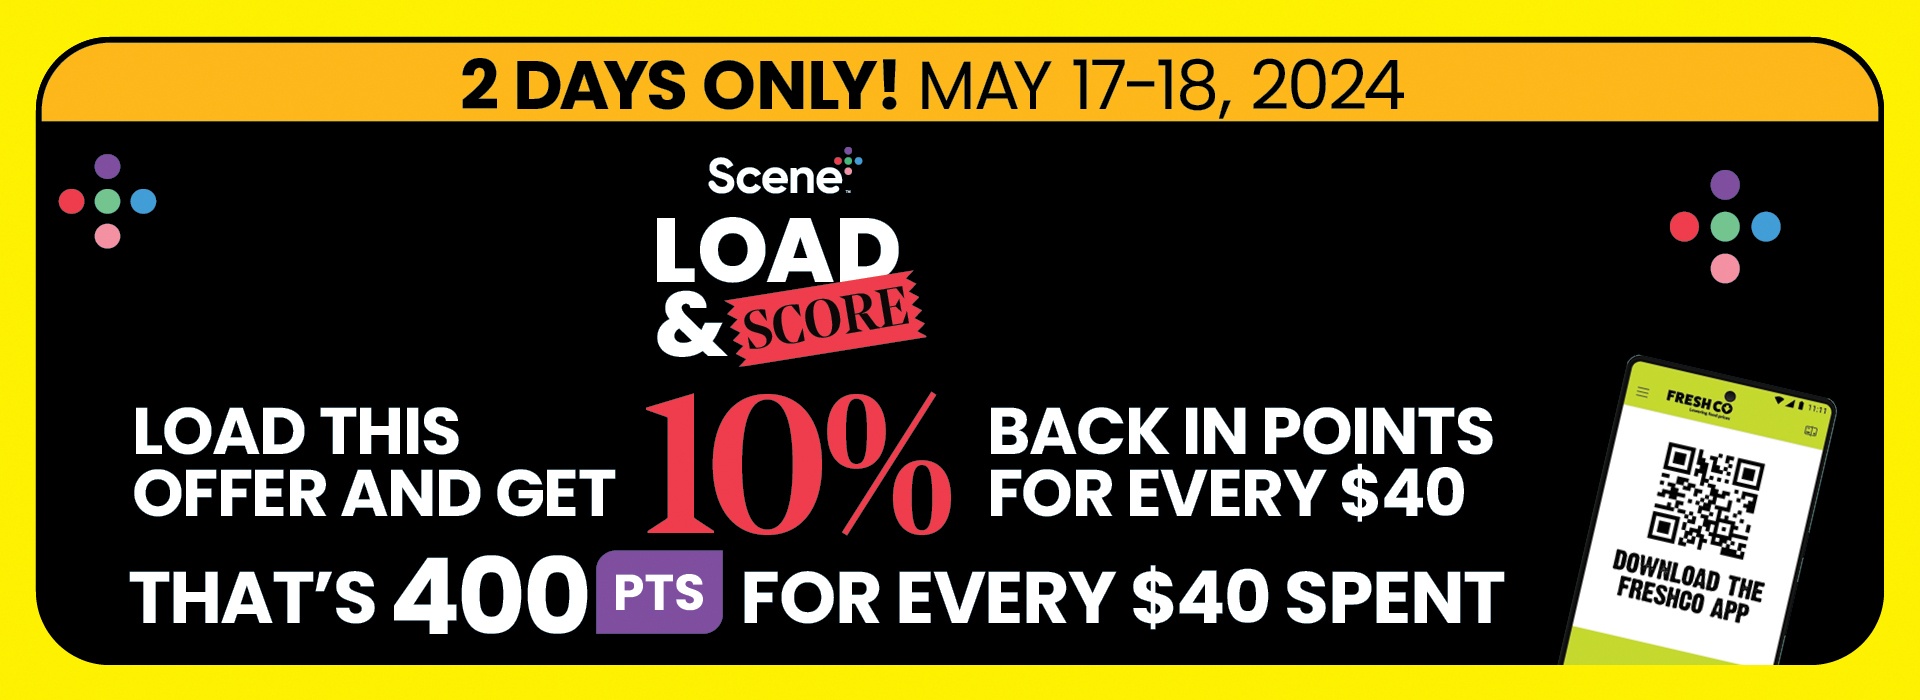 The following image contains the text,"Â  Download the Freshco app, available for two days only! May 17-18, 2024. Load this offer and get 10% back in points for every $40, and that's 400 Points for every $40 spent.